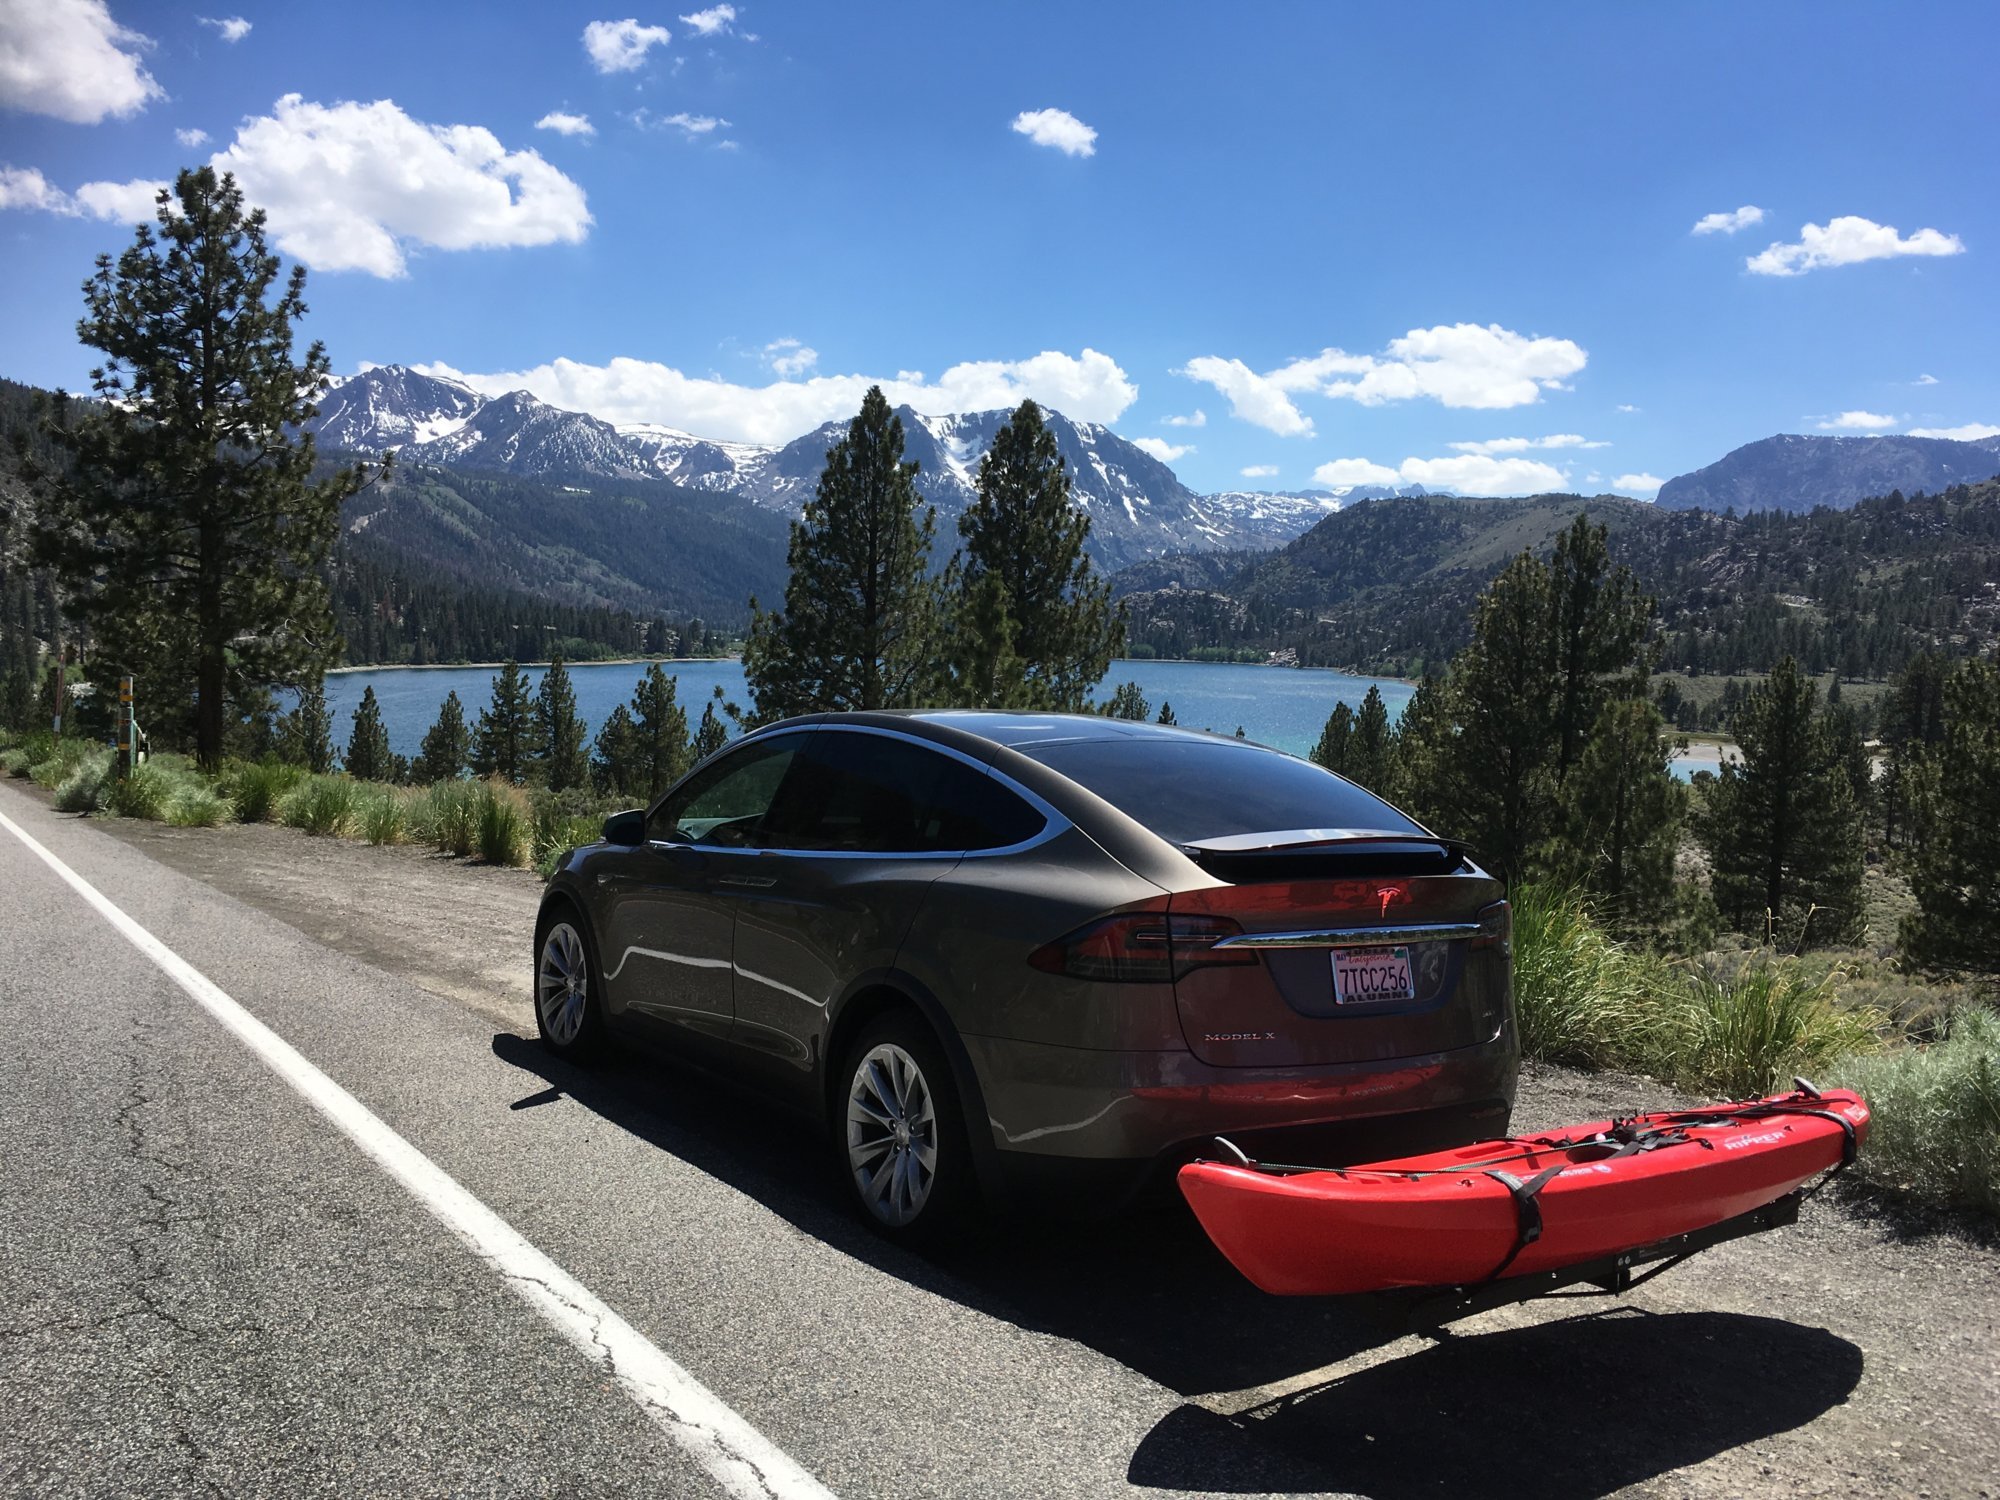 Kayaking with the Model X